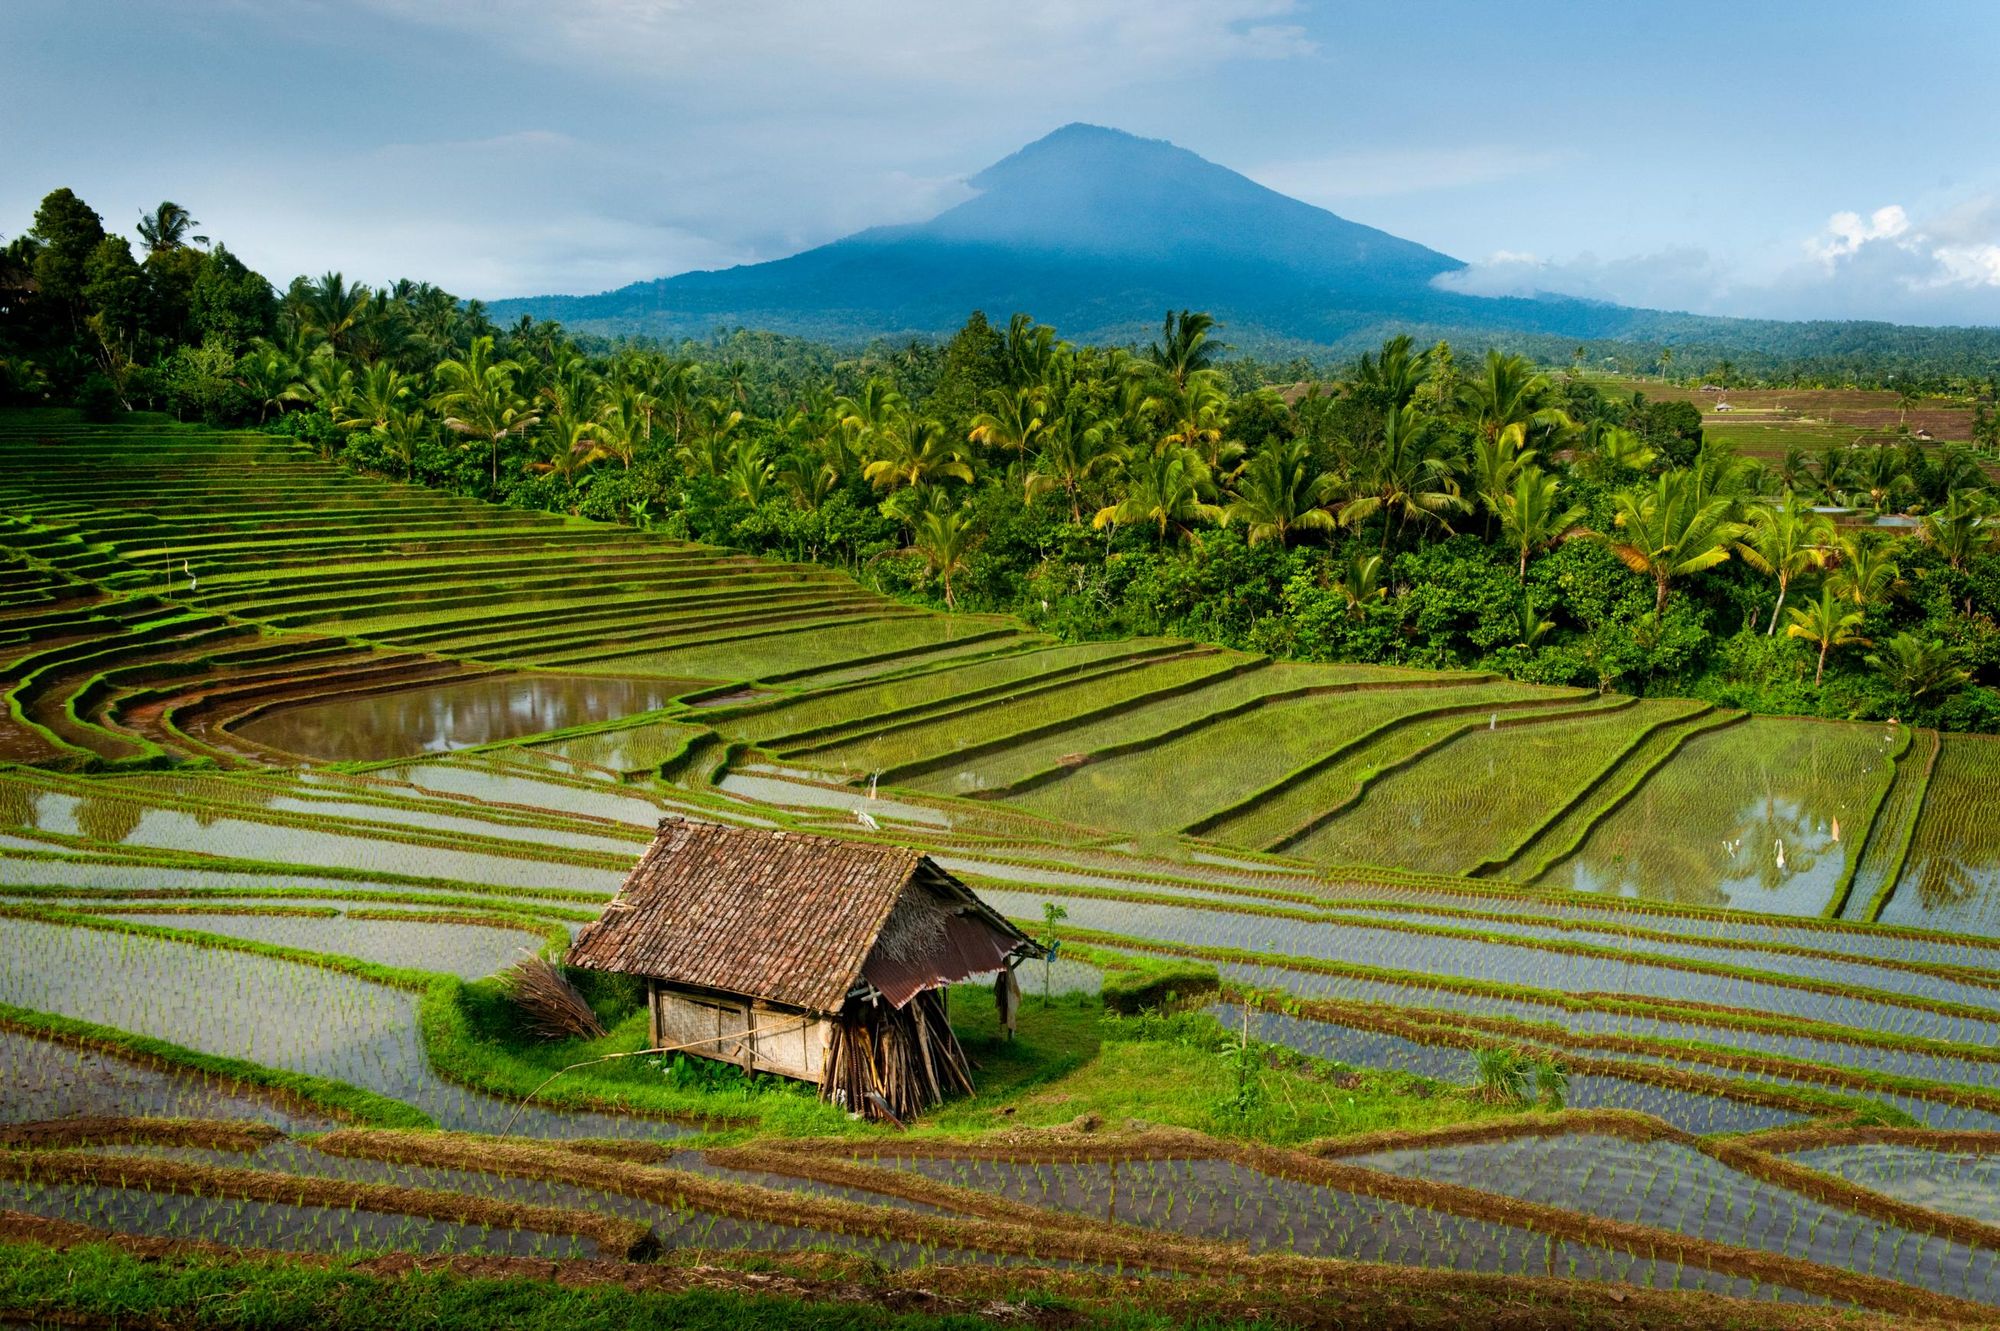 The spectacular rice terraces of Belimbing, Bali with Batukaru in the background. Photo: Getty